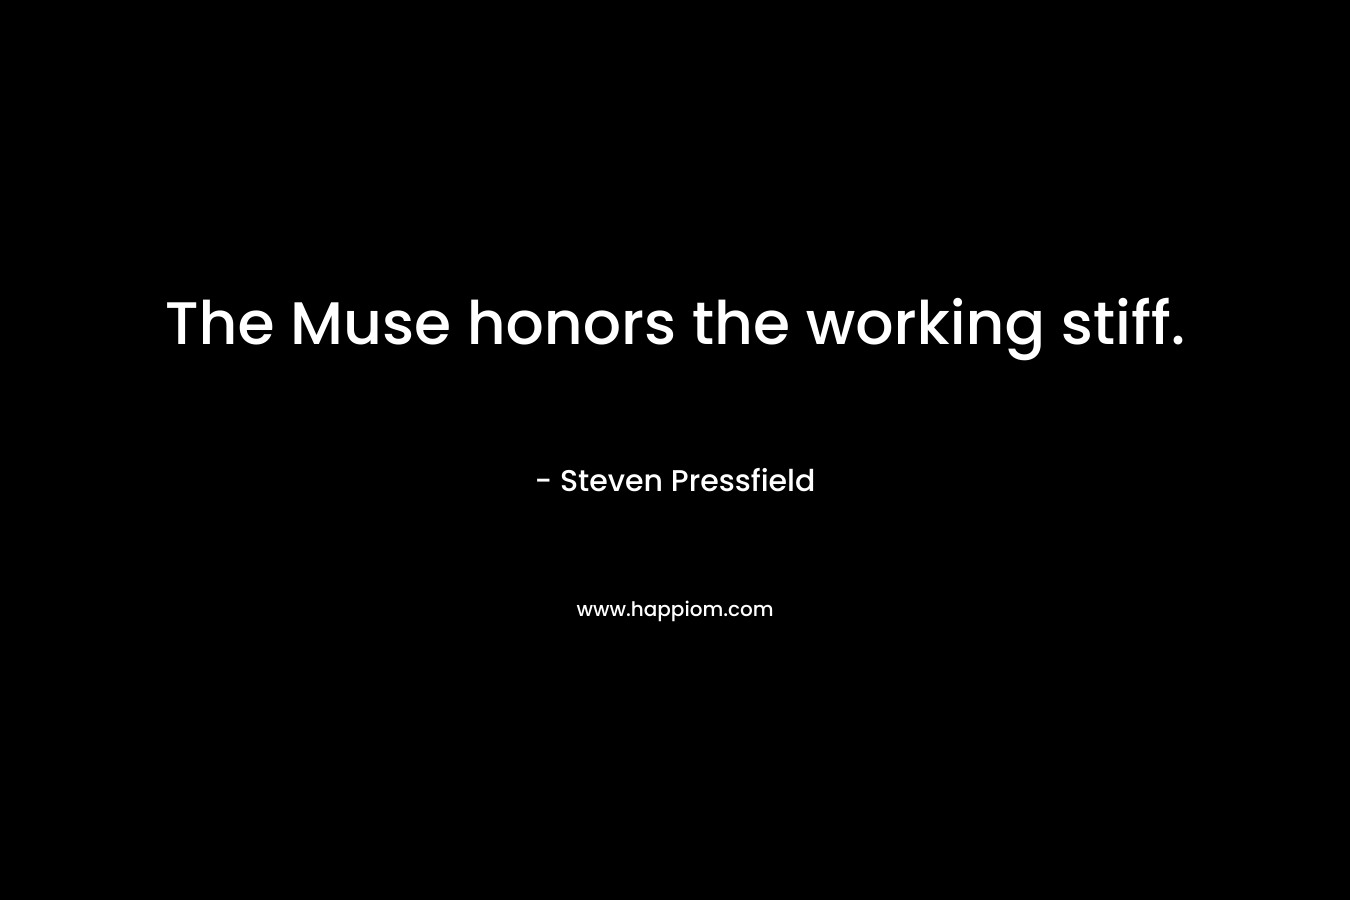 The Muse honors the working stiff.